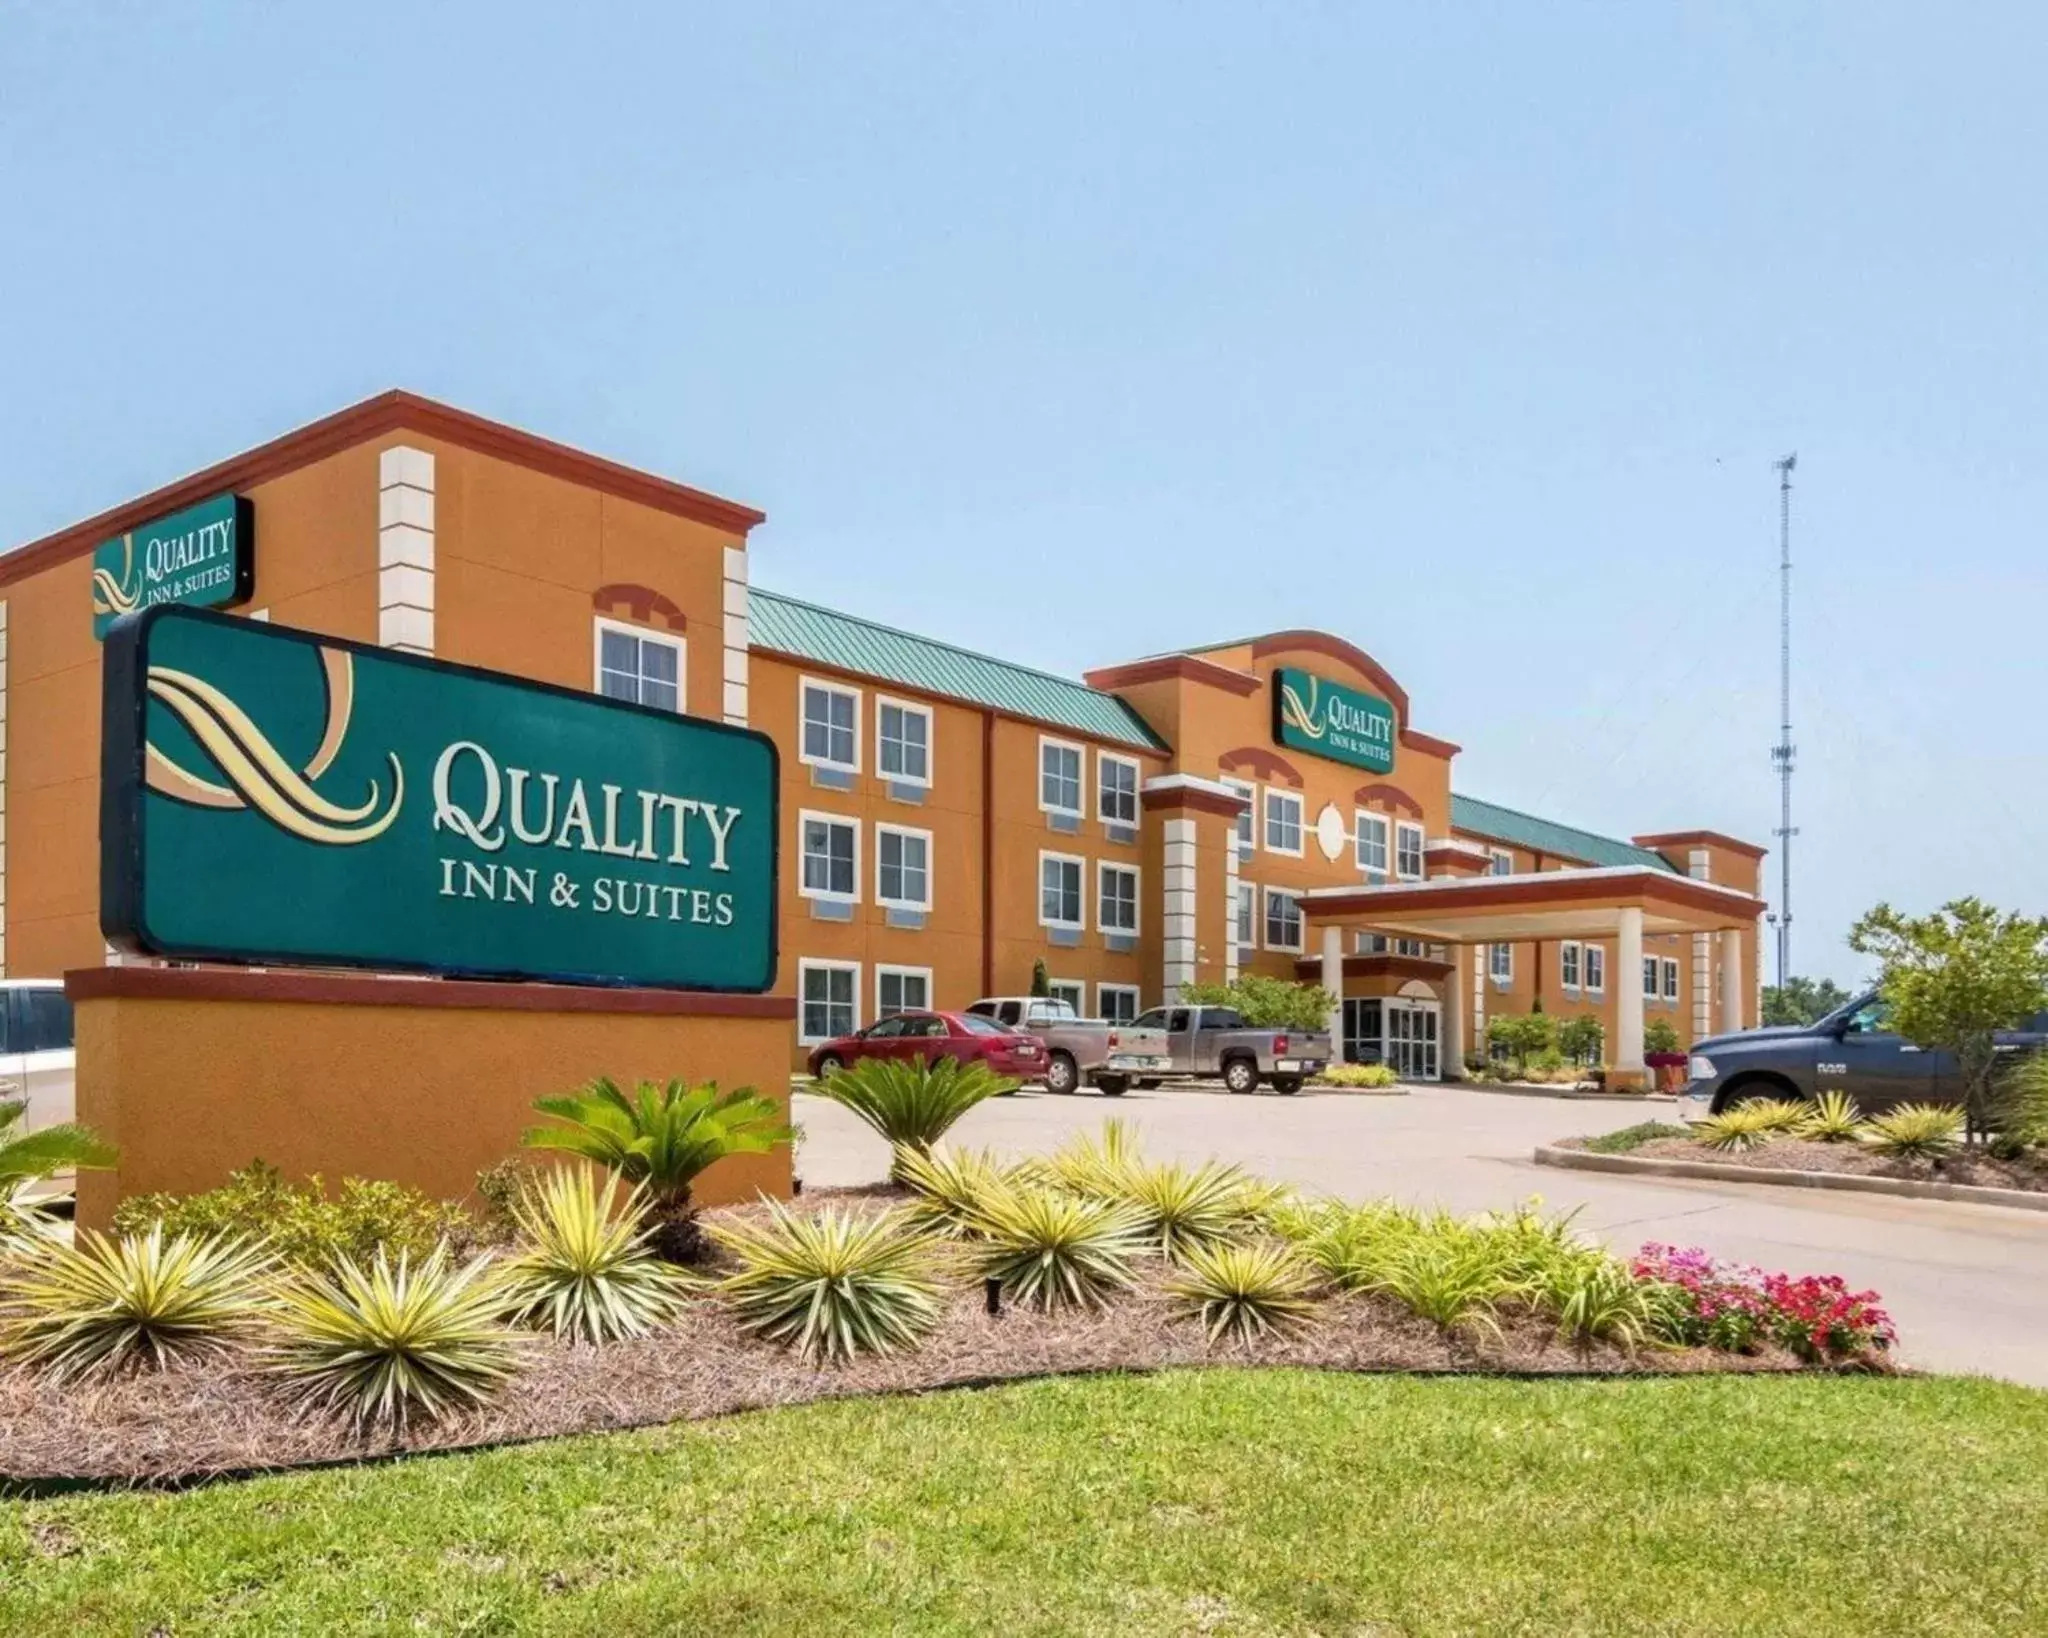 Property building in Quality Inn & Suites West Monroe